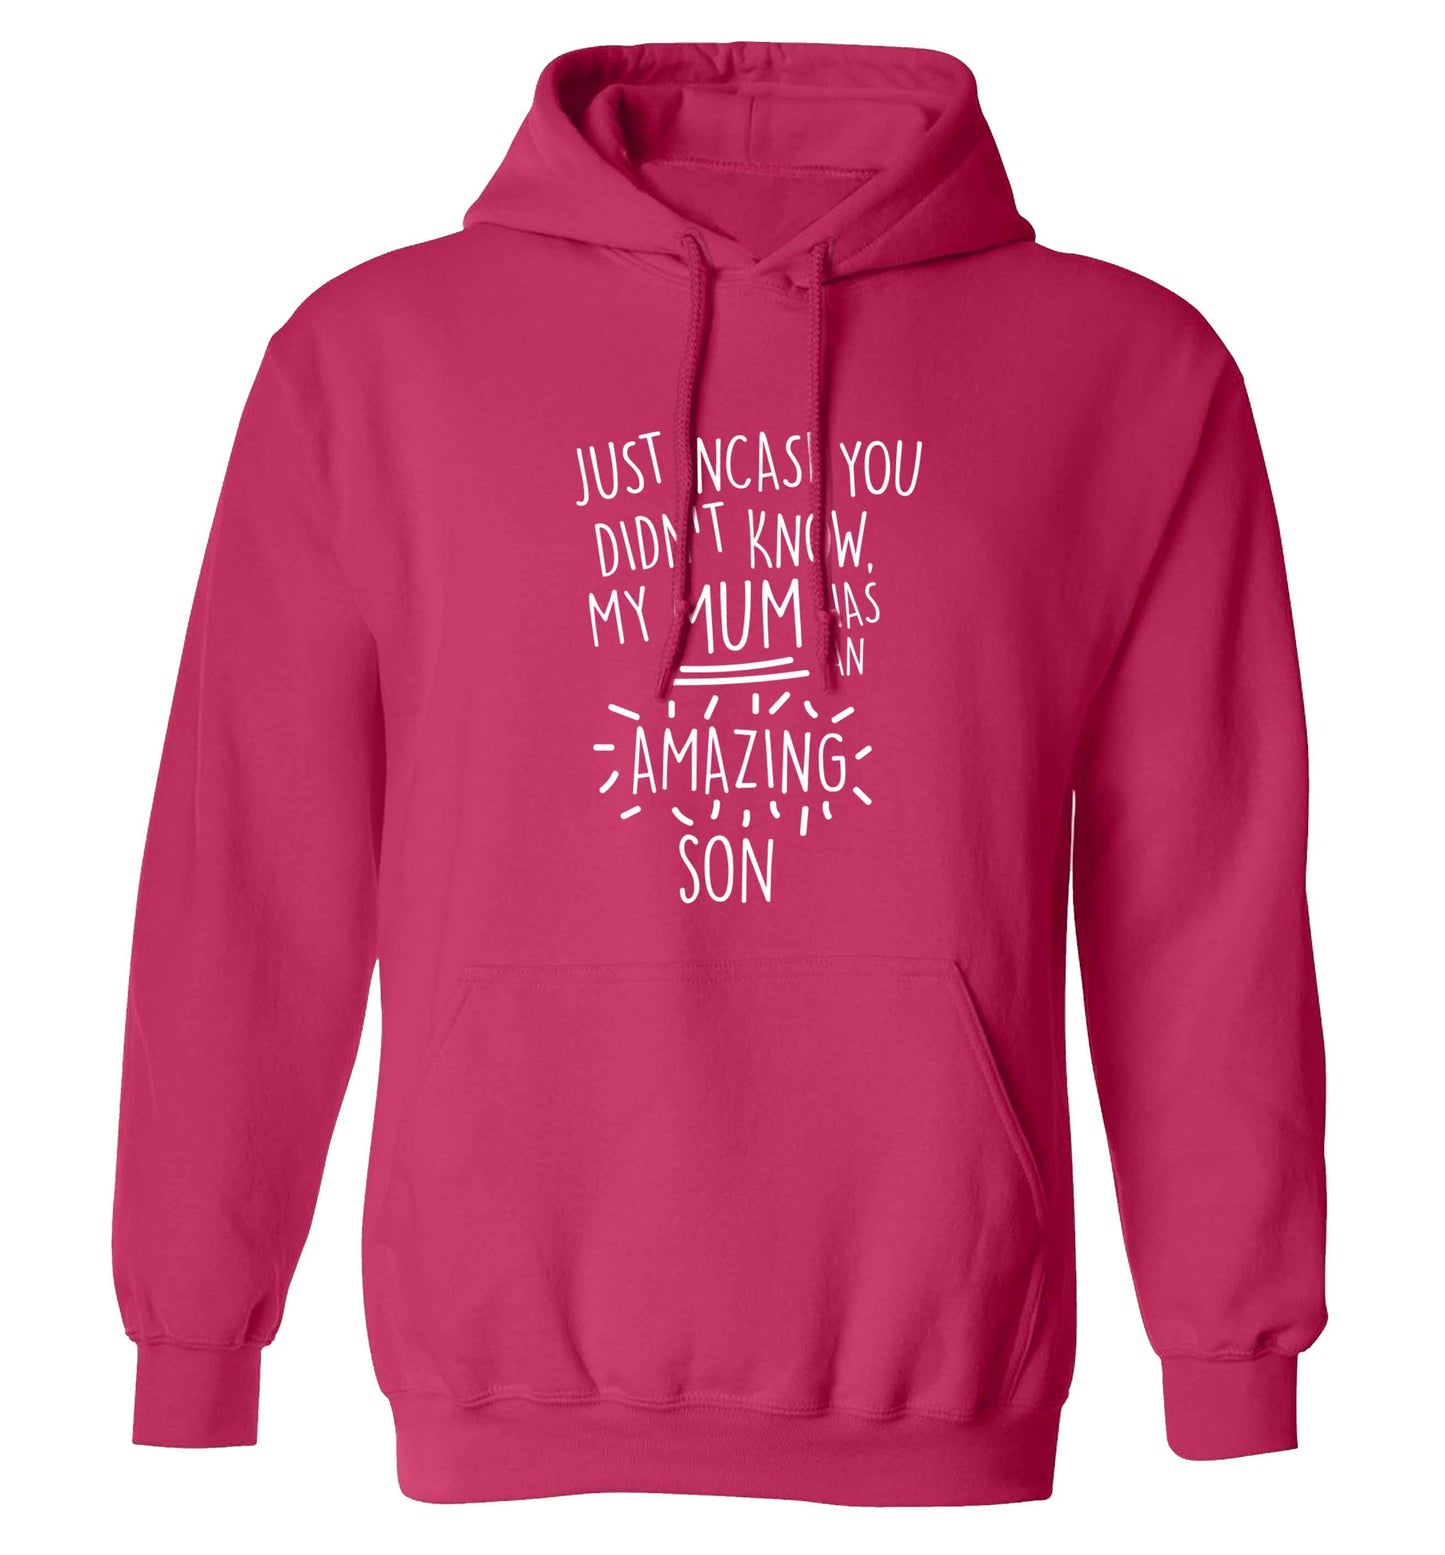 Just incase you didn't know my mum has an amazing son adults unisex pink hoodie 2XL